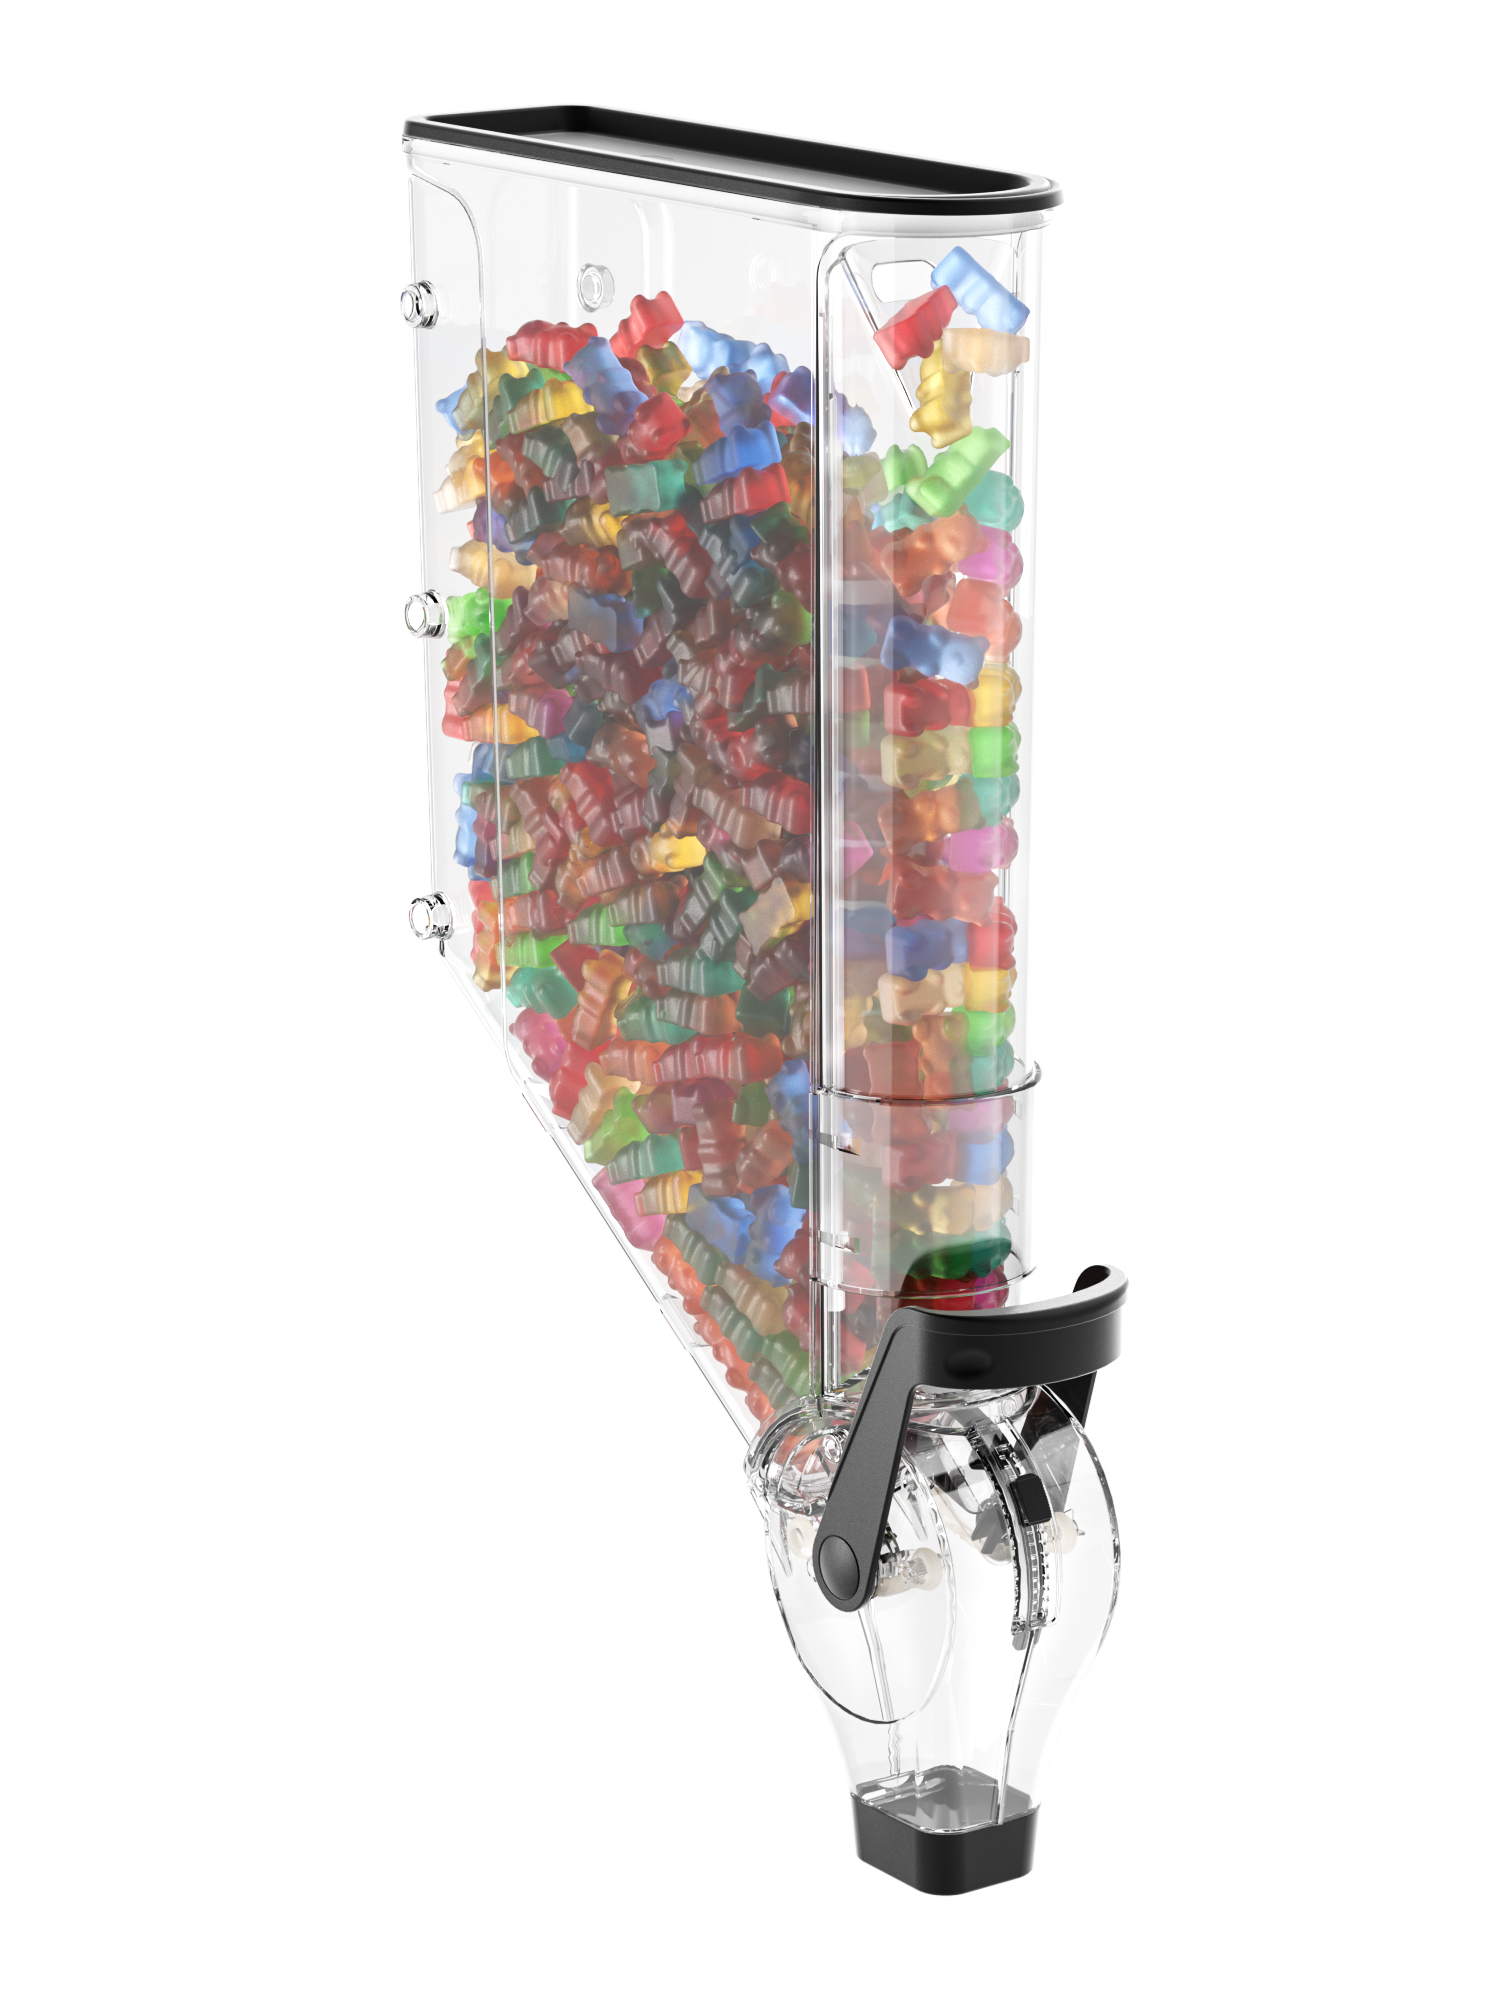 ZT-09 10L Ecobox New wall mount pick and mix dry grain topping nuts cereal dispenser cereal gravity bulk food dispenser